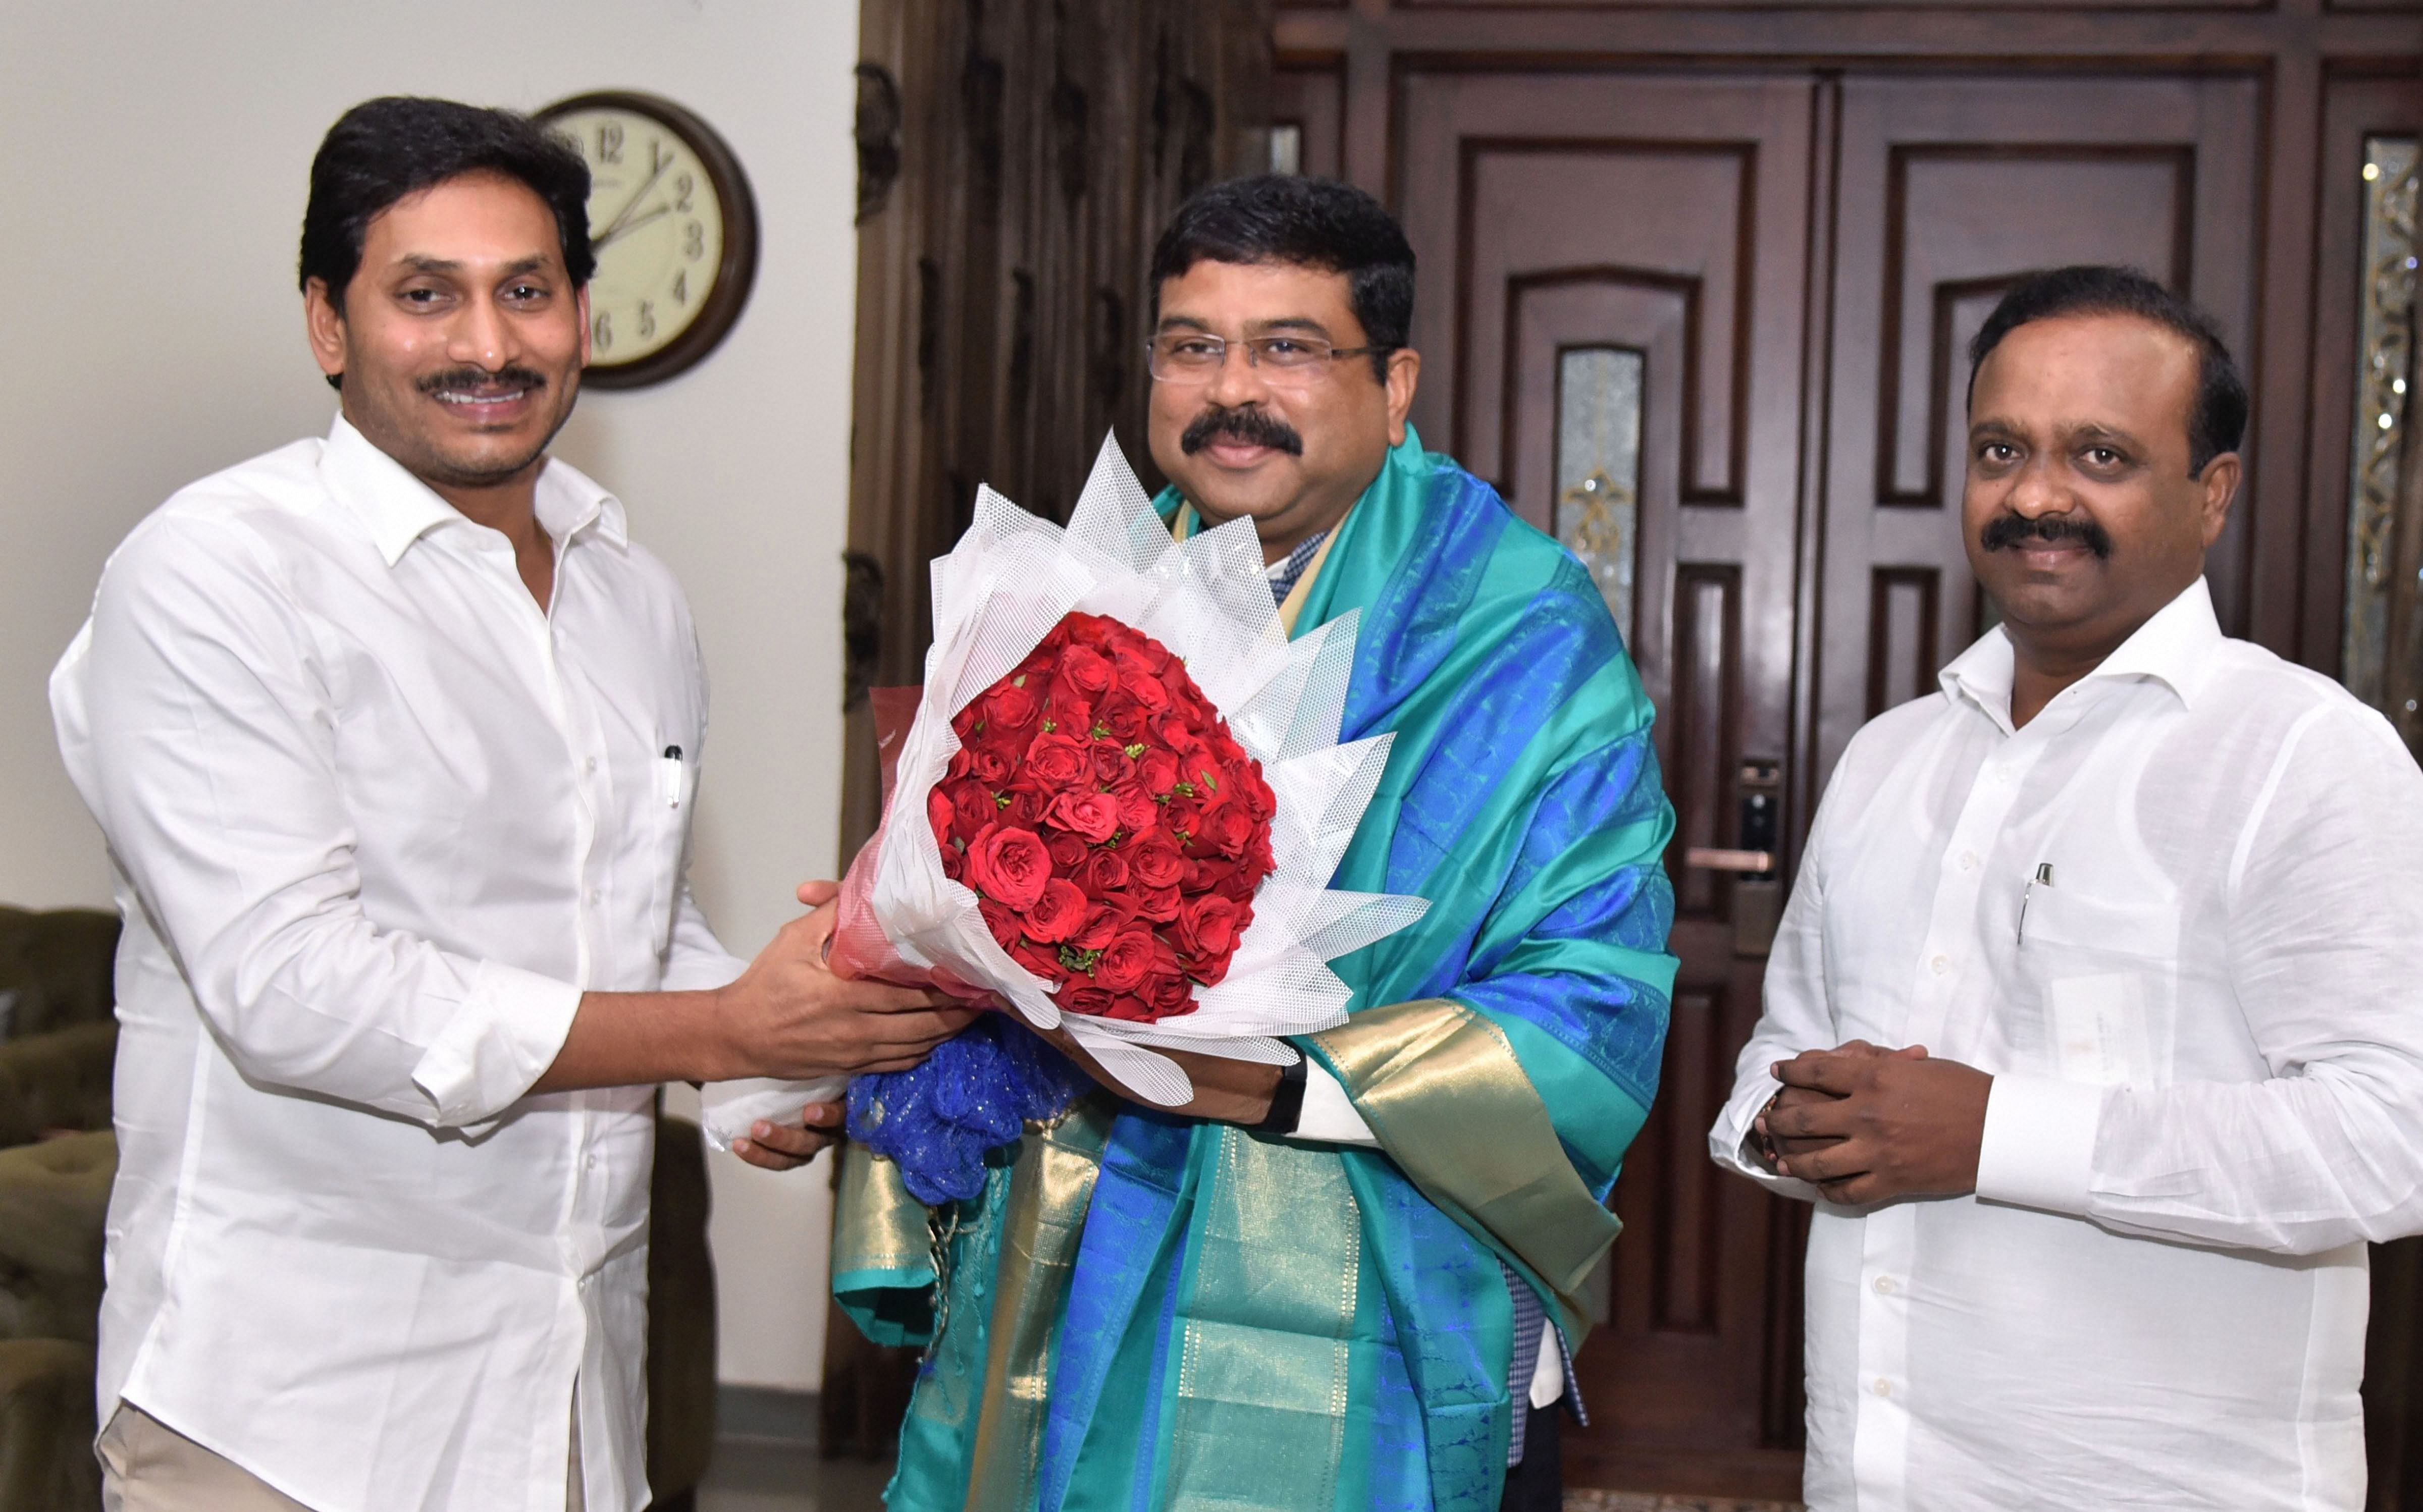 Union Petroleum and Natural Gas Minister Dharmendra Pradhan being presented with a bouquet by Andhra Pradesh Chief Minister YS Jaganmohan Reddy during a meeting, in Guntur (PTI Photo)